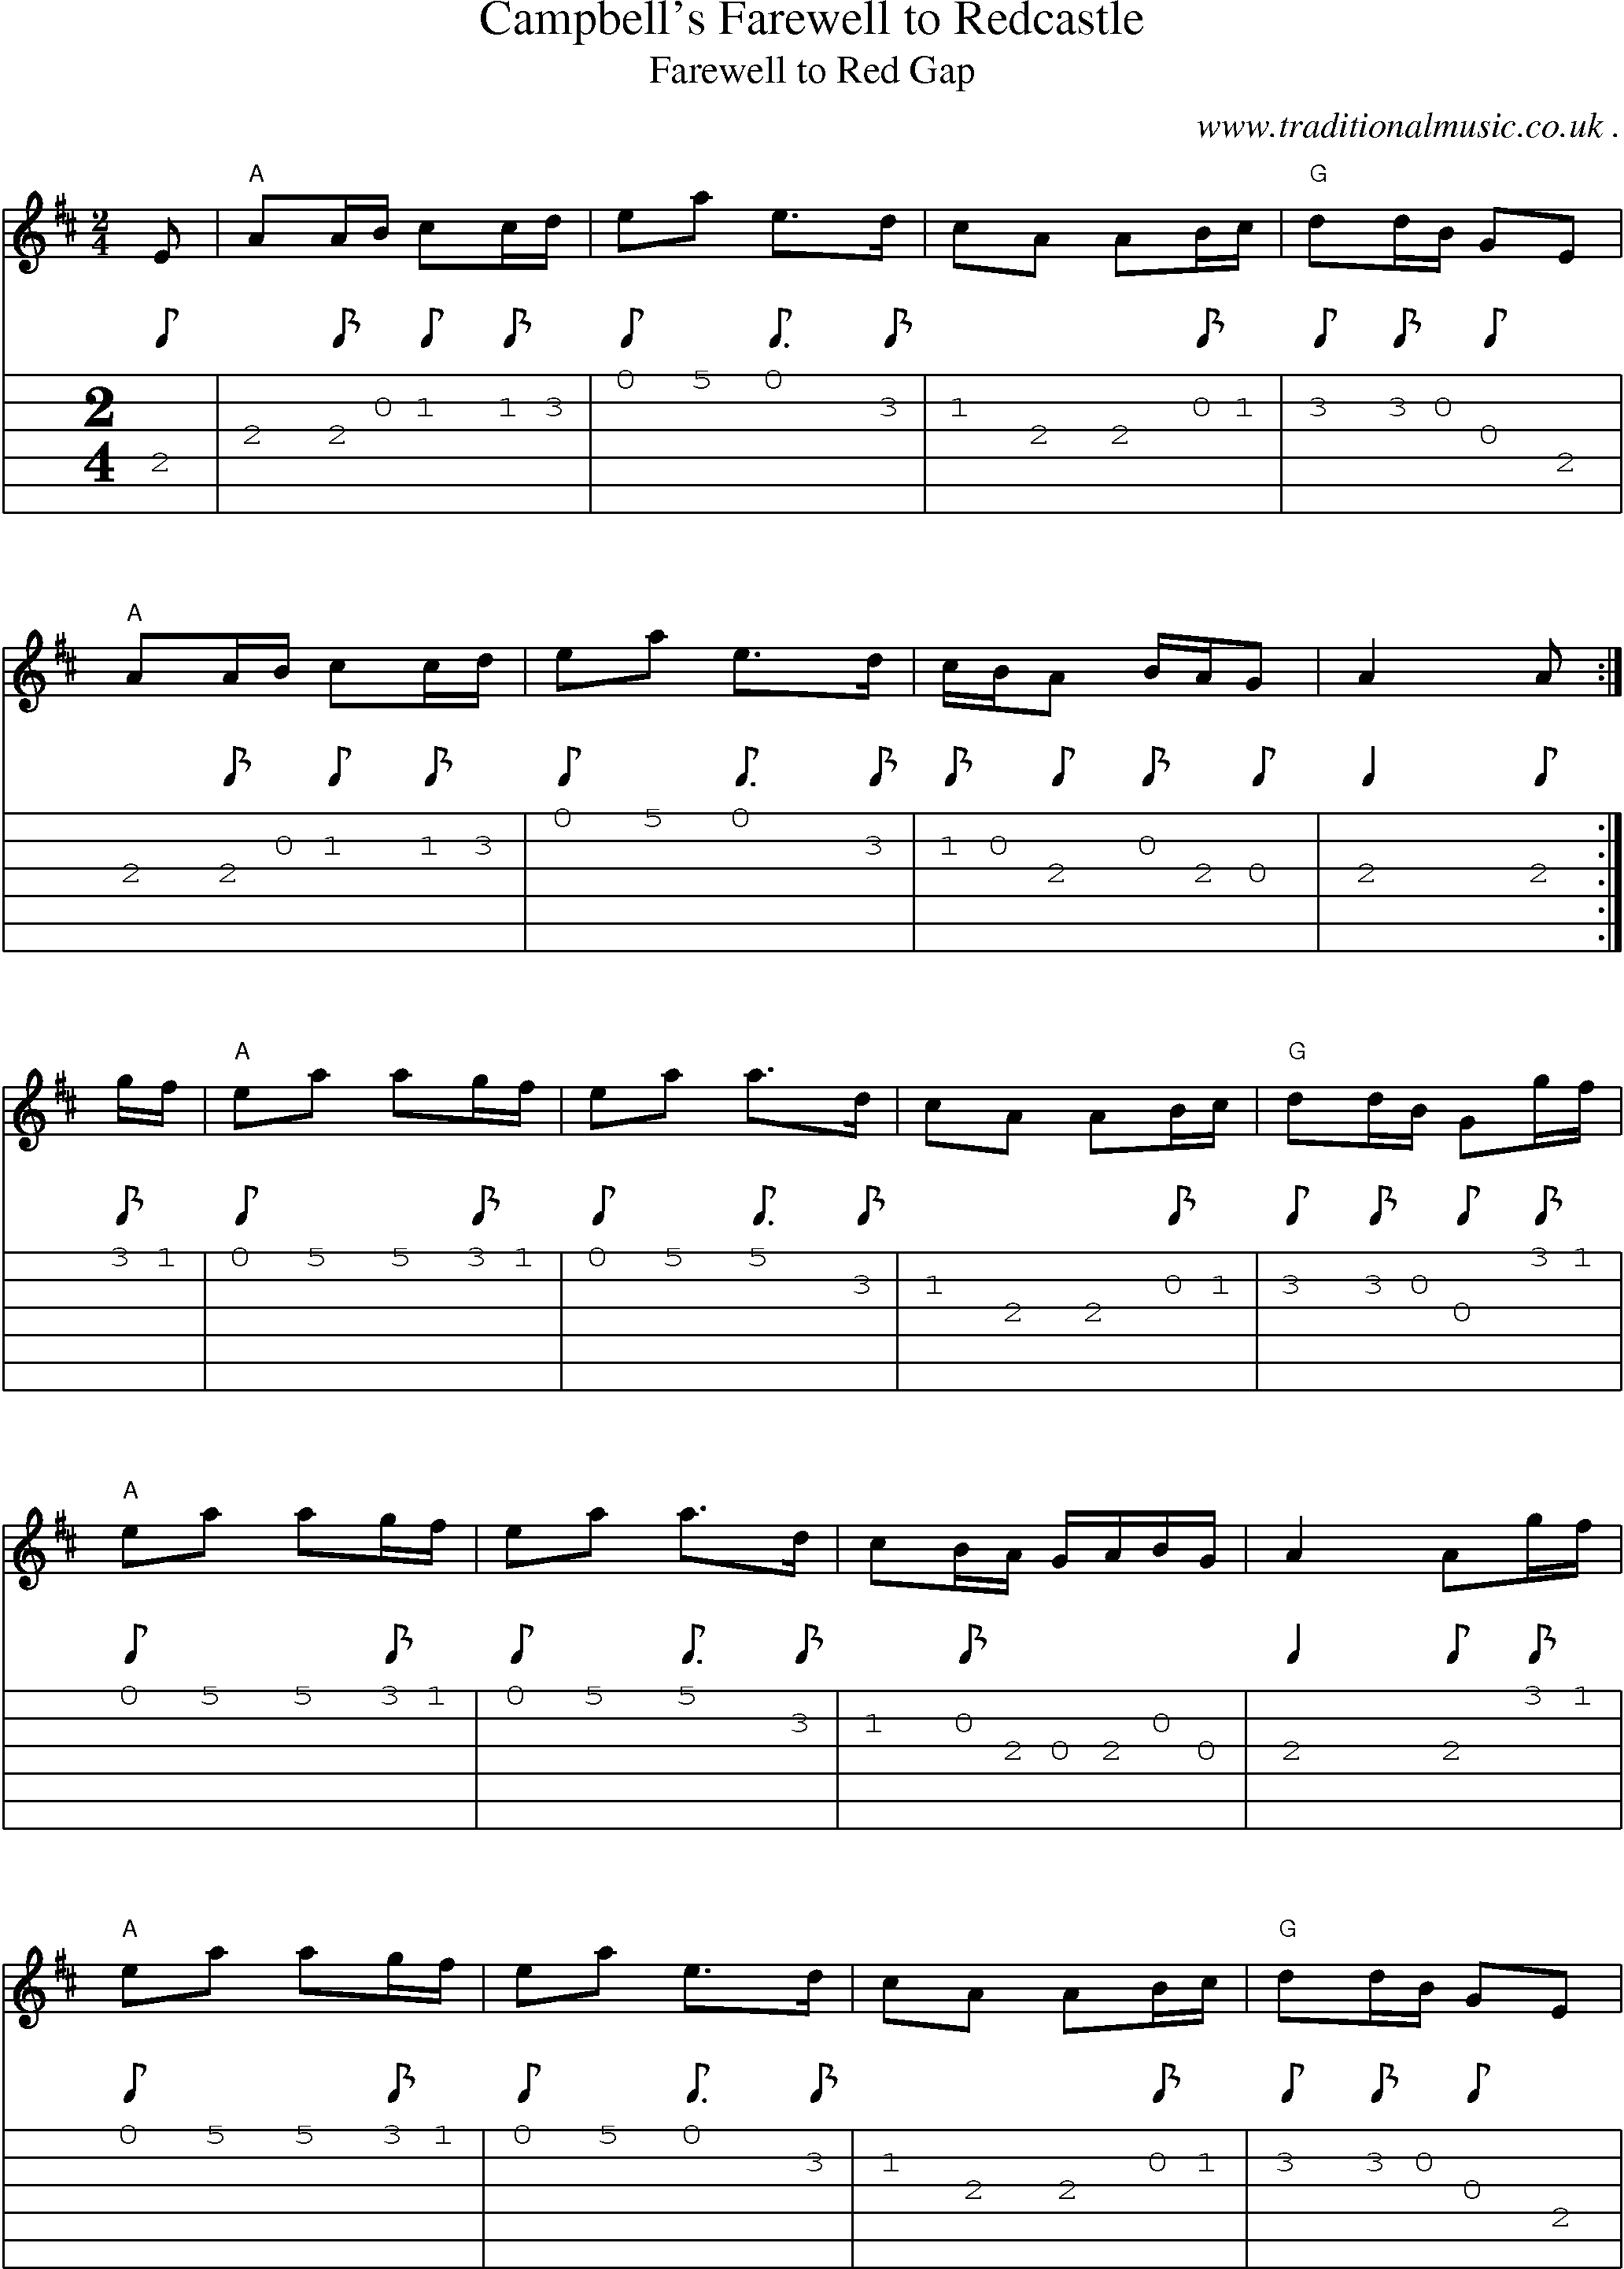 Music Score and Guitar Tabs for Campbells Farewell to Redcastle1